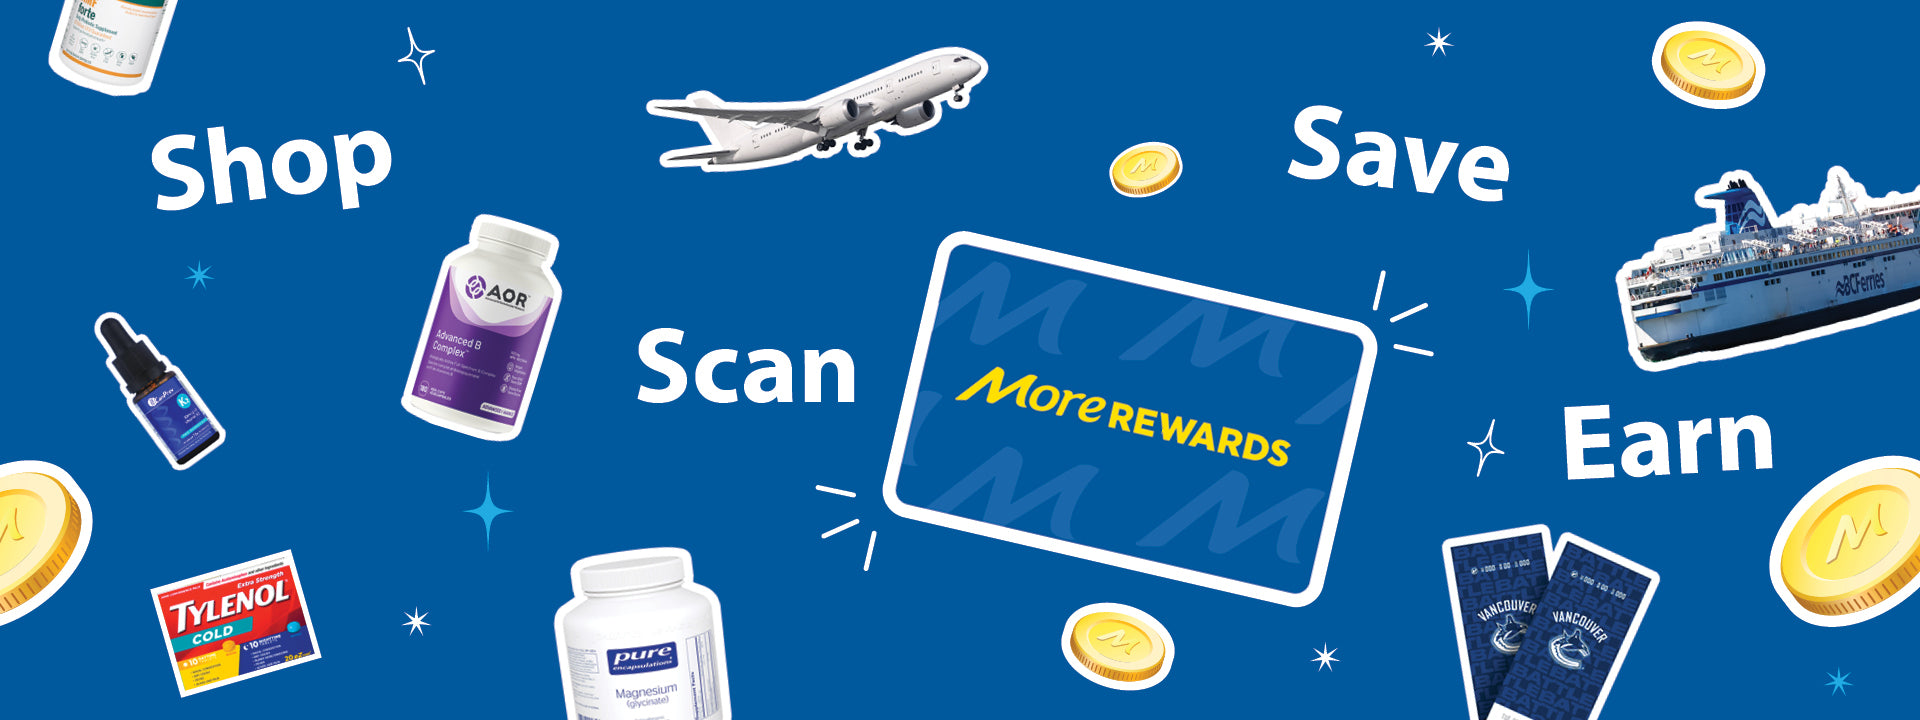 Shop, Scan, Save, and Earn with More Rewards